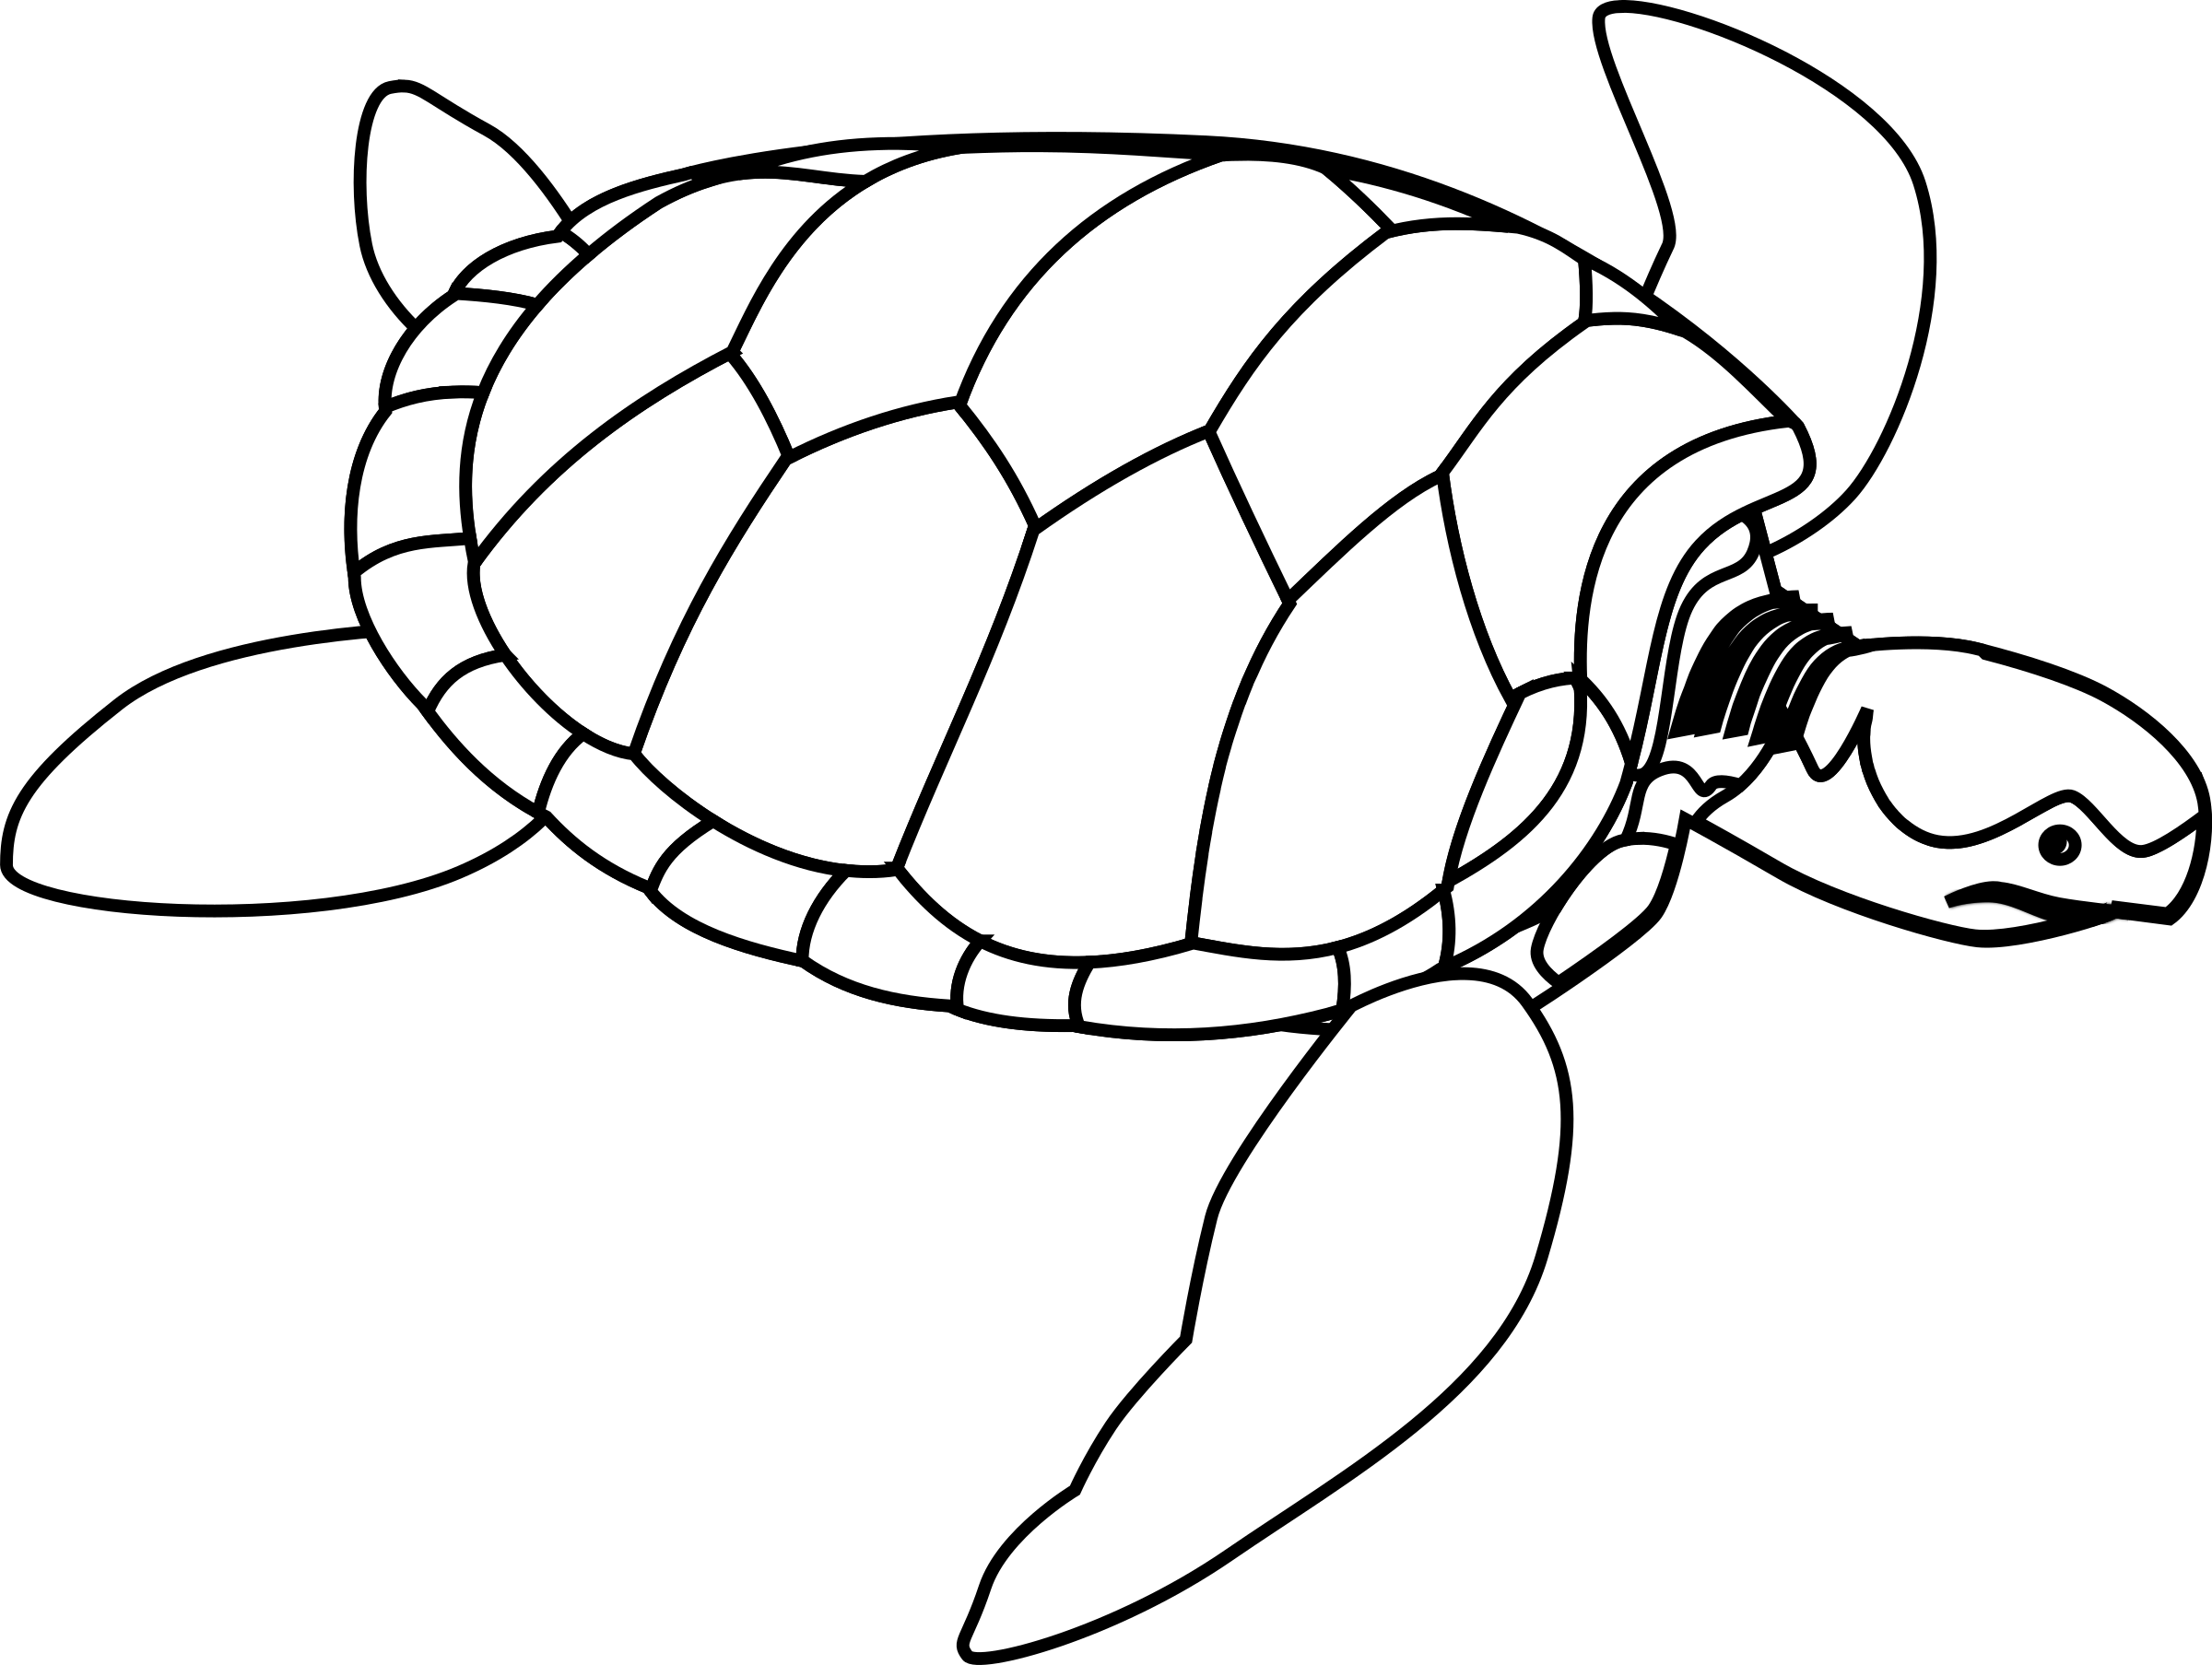 draw a turtle shell.